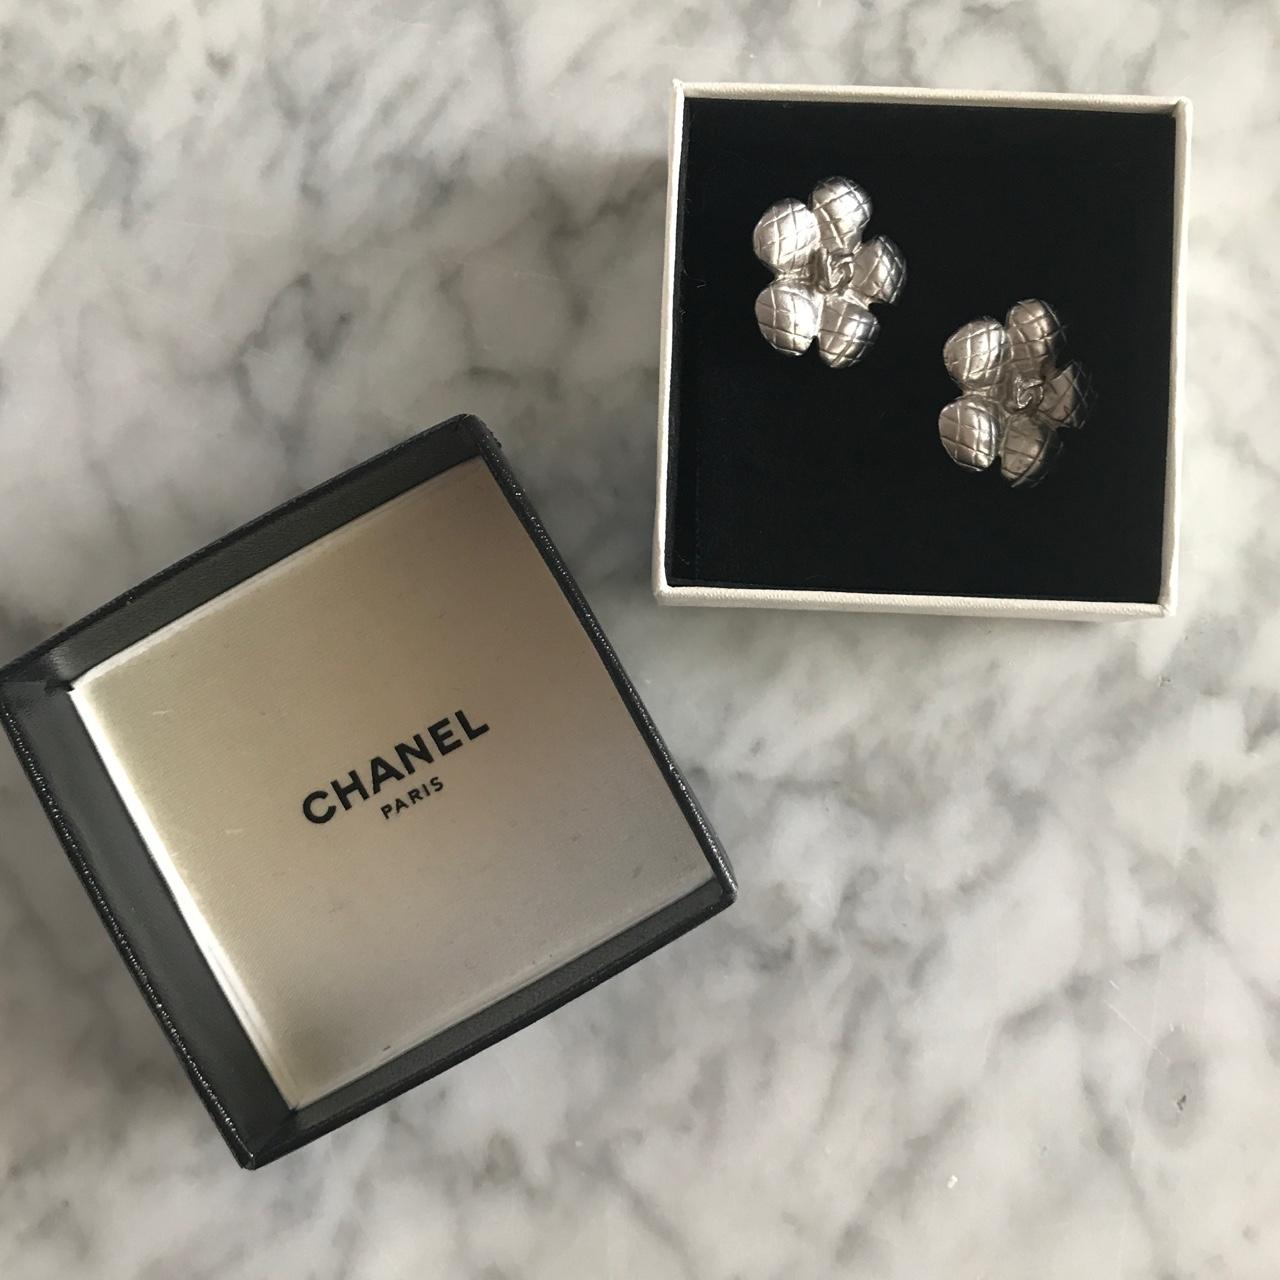 Chanel Camelia earrings. Classic Chanel clip-on